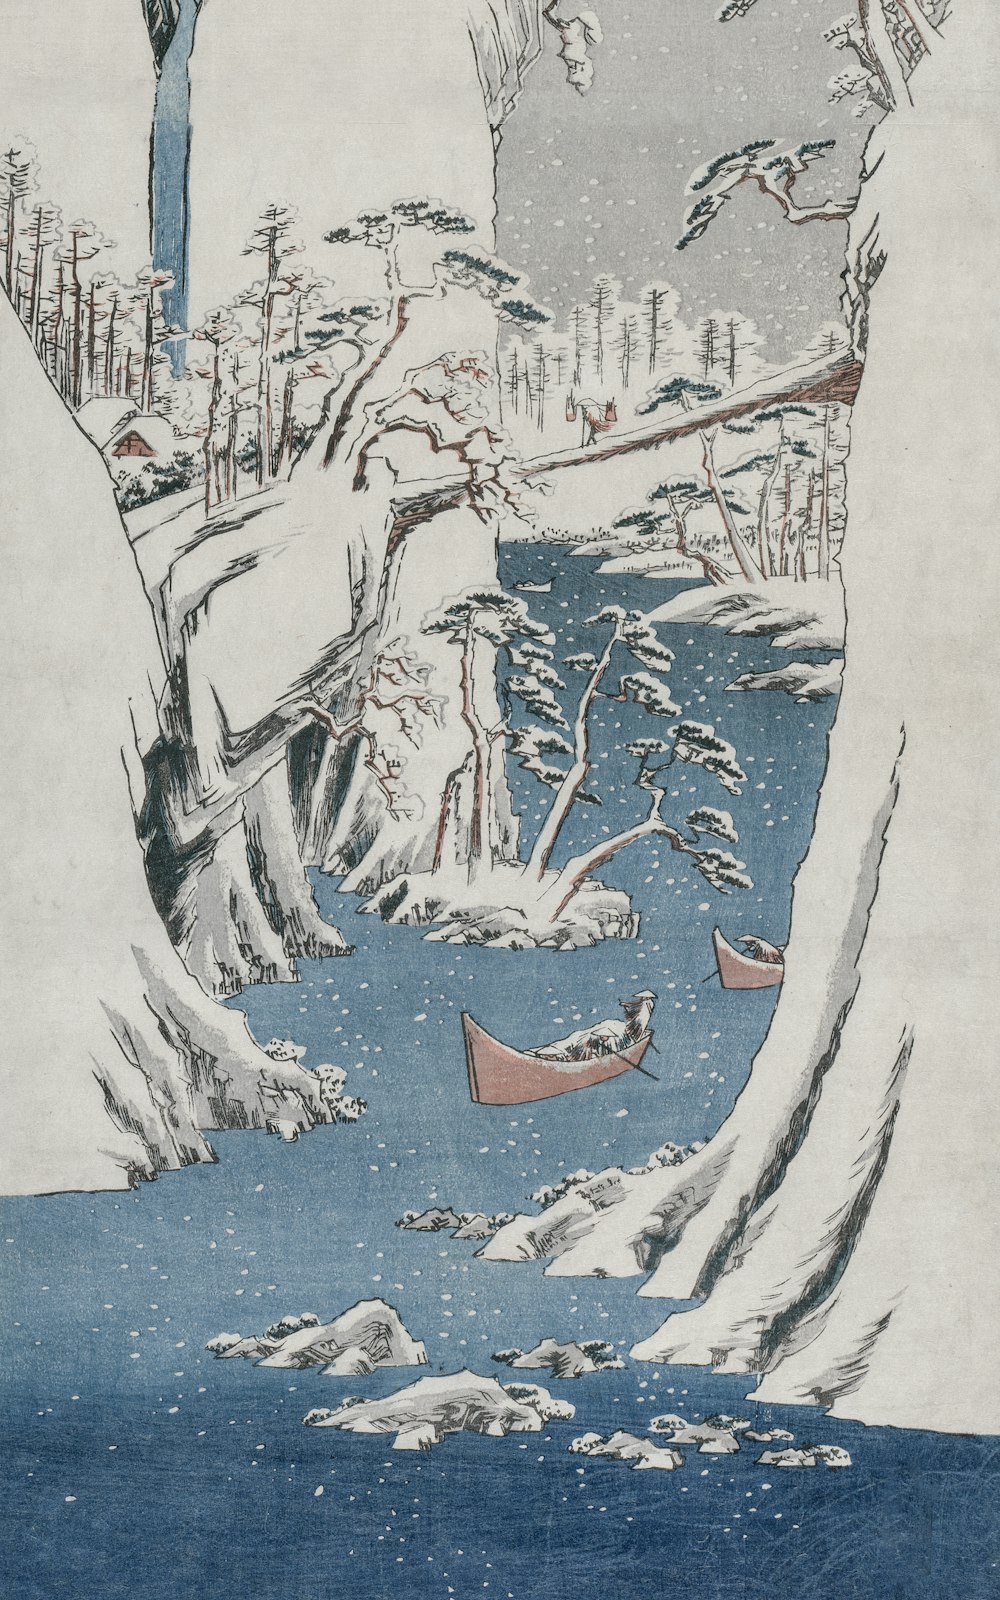 a painting of a snowy landscape with a boat in the water